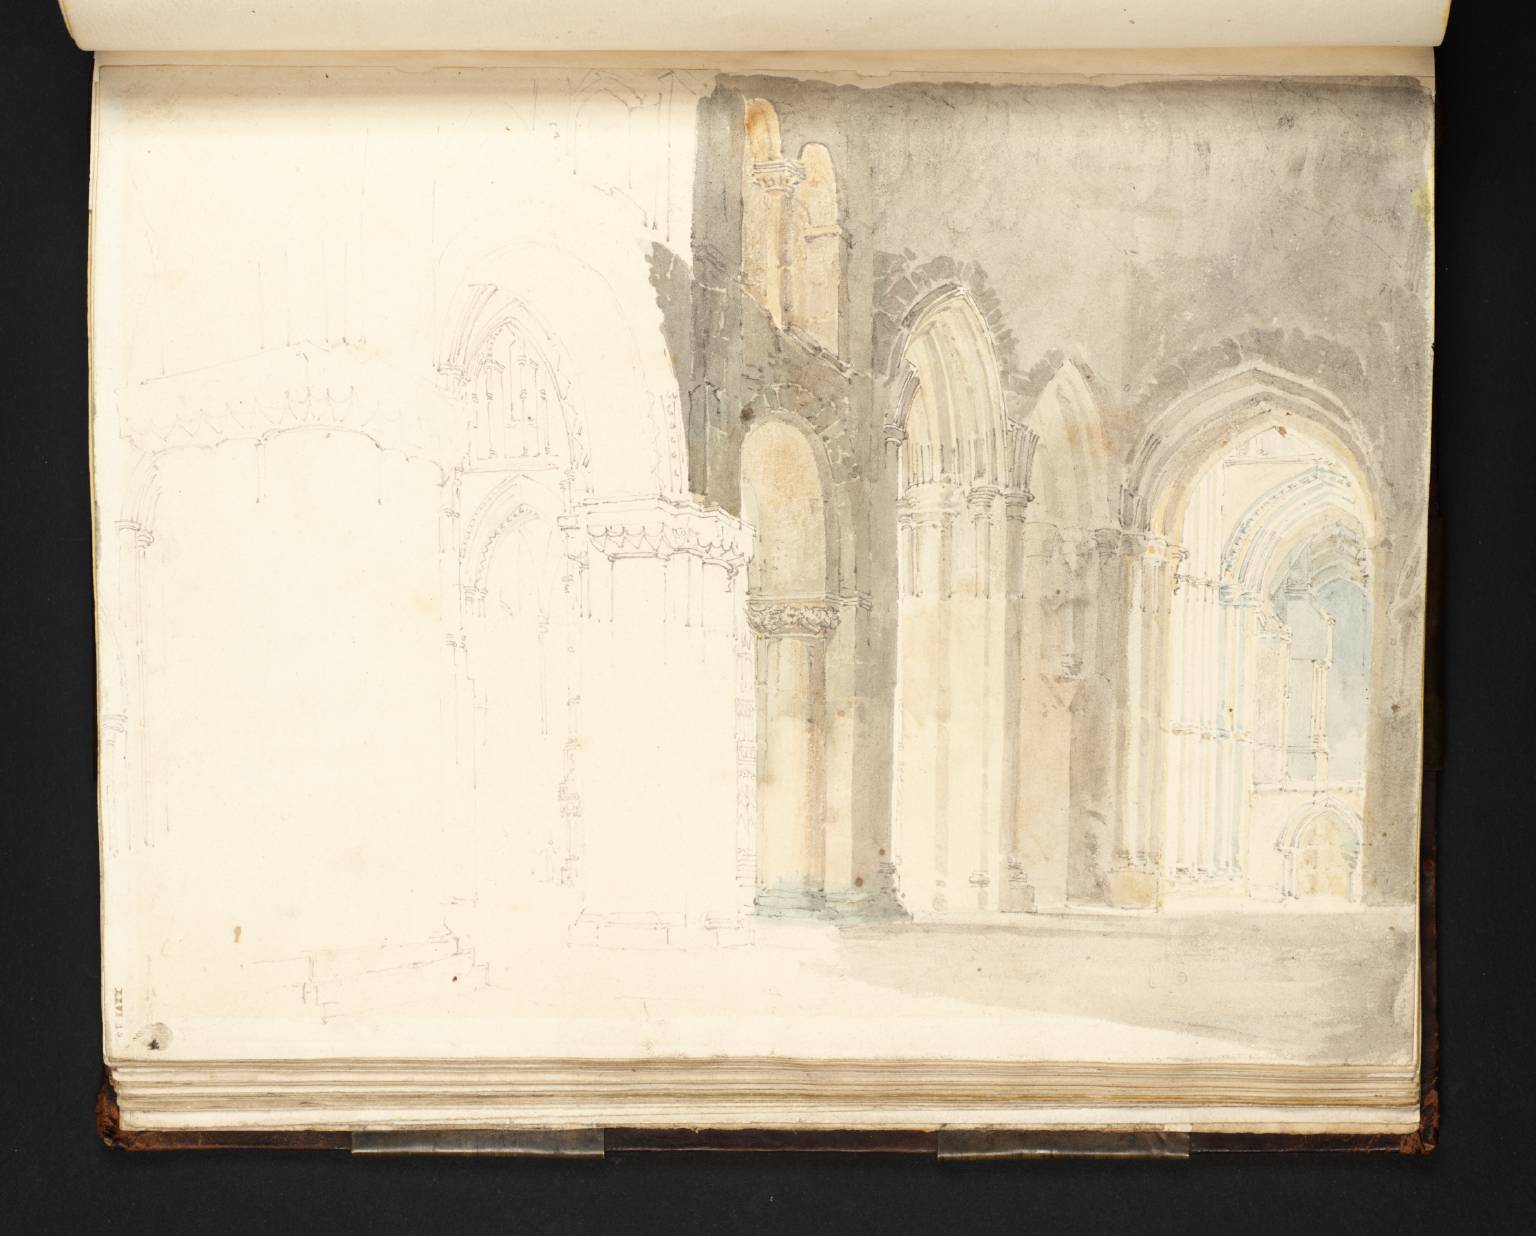 J. M. W. Turner, The Interior of St David's Cathedral, 1795, Tate